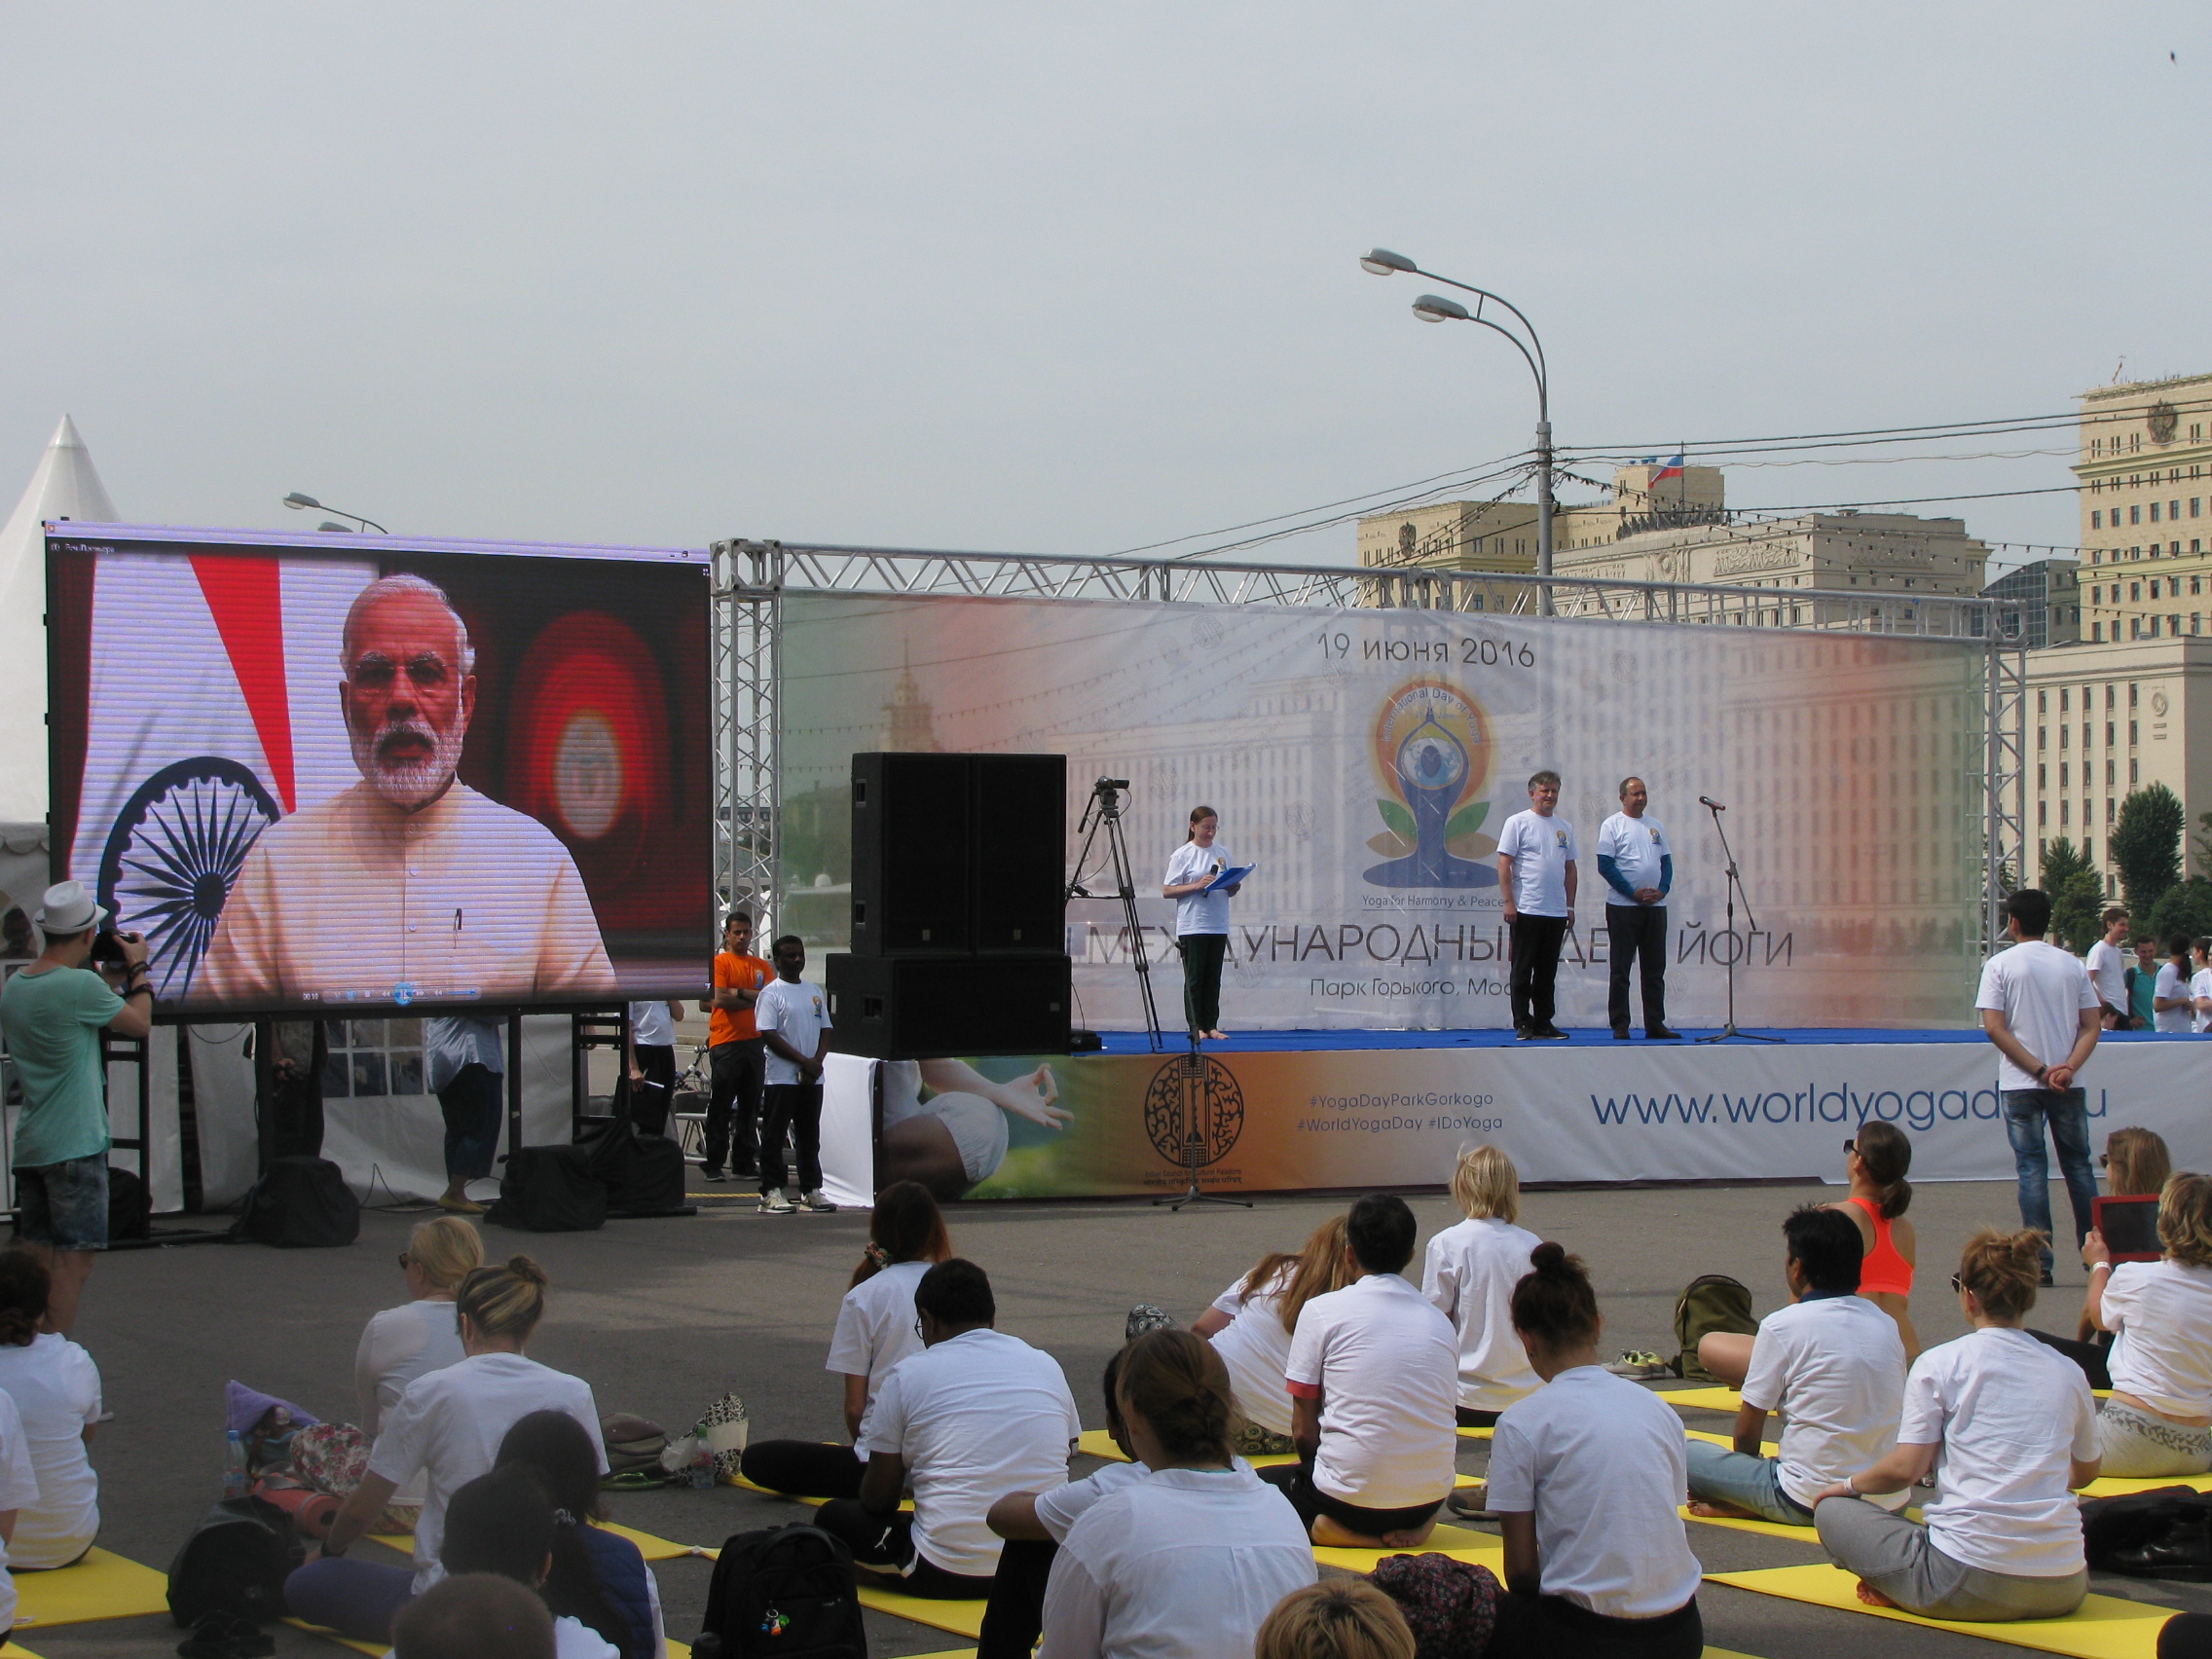 Before the start of the class, which lasted more than two hours, the audience was shown a video of the Prime Minister Narendra Modi. In his message to the Russians, he tried to reveal the yoga mission. According to the President of India, the uniqueness of this gift of ancient Indian tradition it is that it disciplines, educates and unites people regardless of their religious or national affiliation.